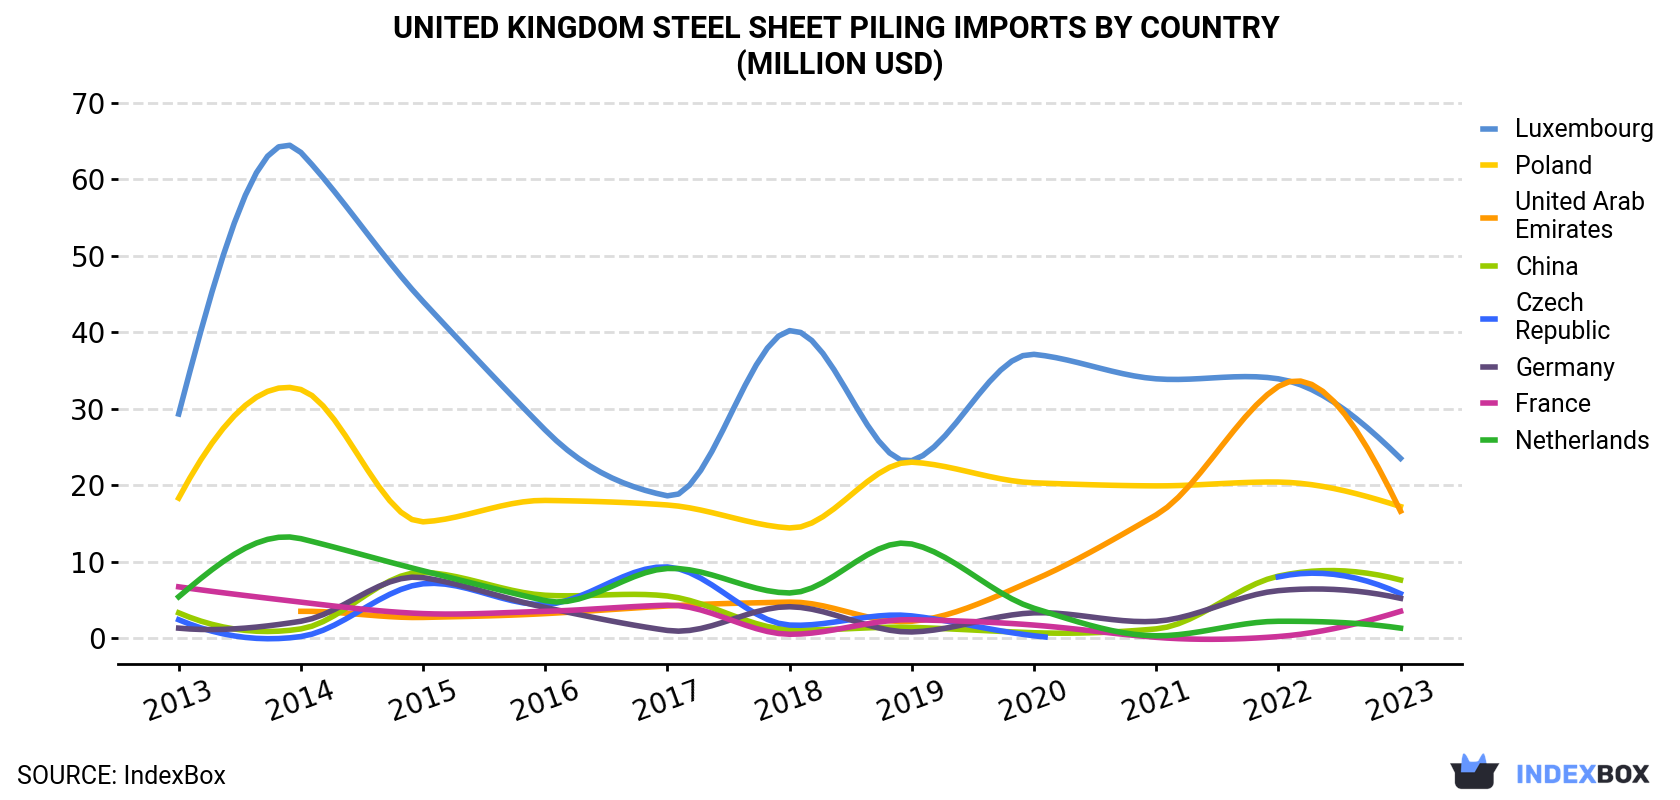 United Kingdom Steel Sheet Piling Imports By Country (Million USD)